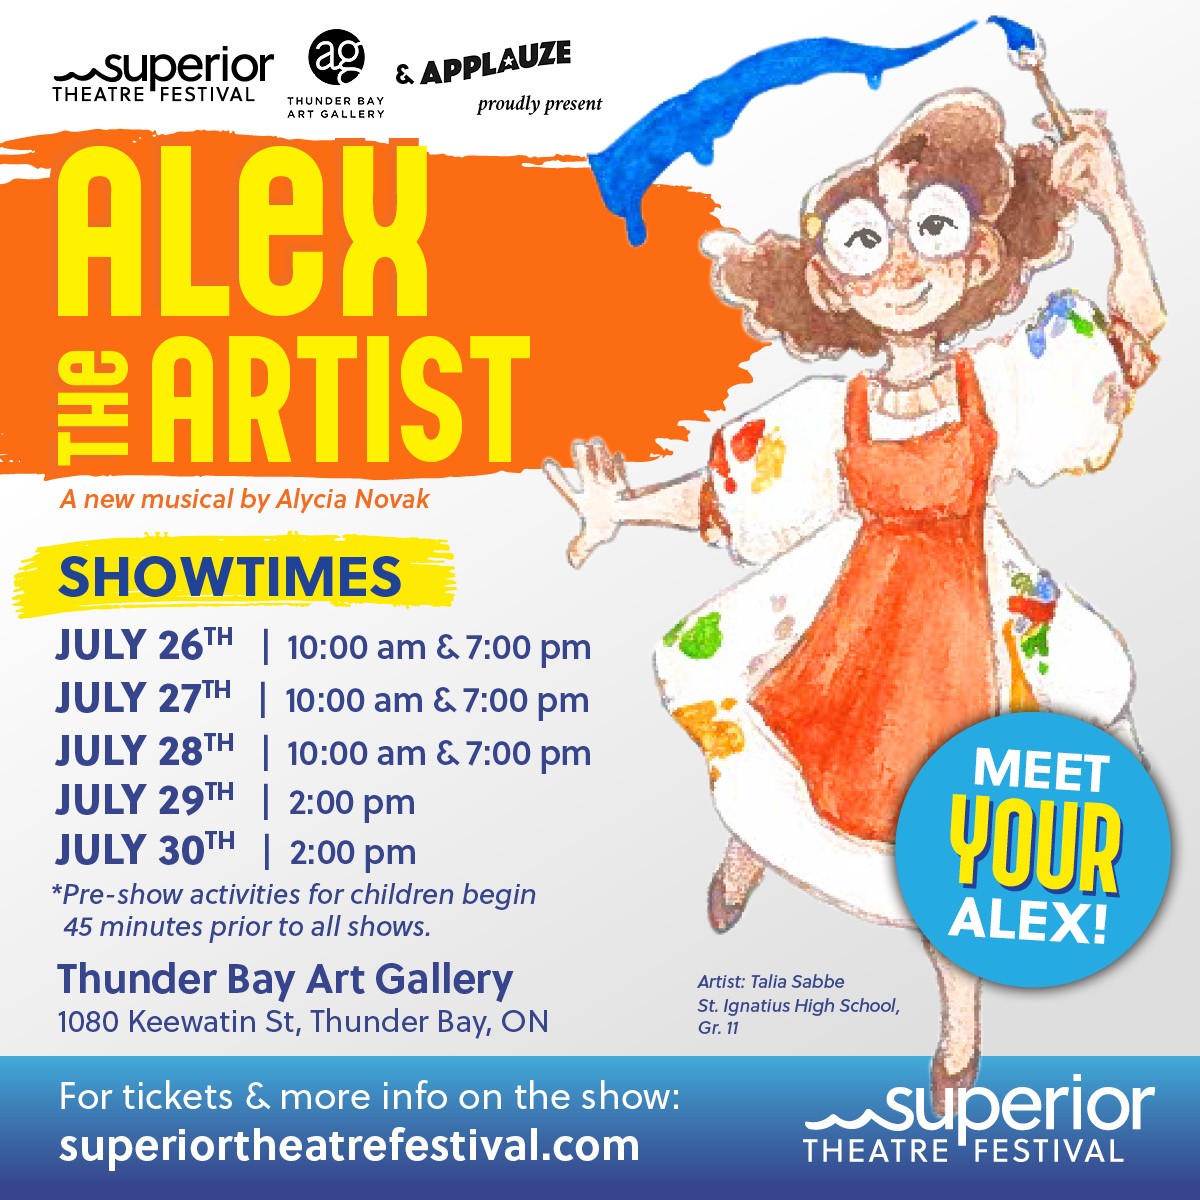 Don't miss out! Starting this Wednesday at the Thunder Bay Art Gallery, the Superior Theatre Festival presents Alex the Artist a new musical by Alycia Novak. For tickets and more info visit: superiortheatrefestival.com/alex-the-artist